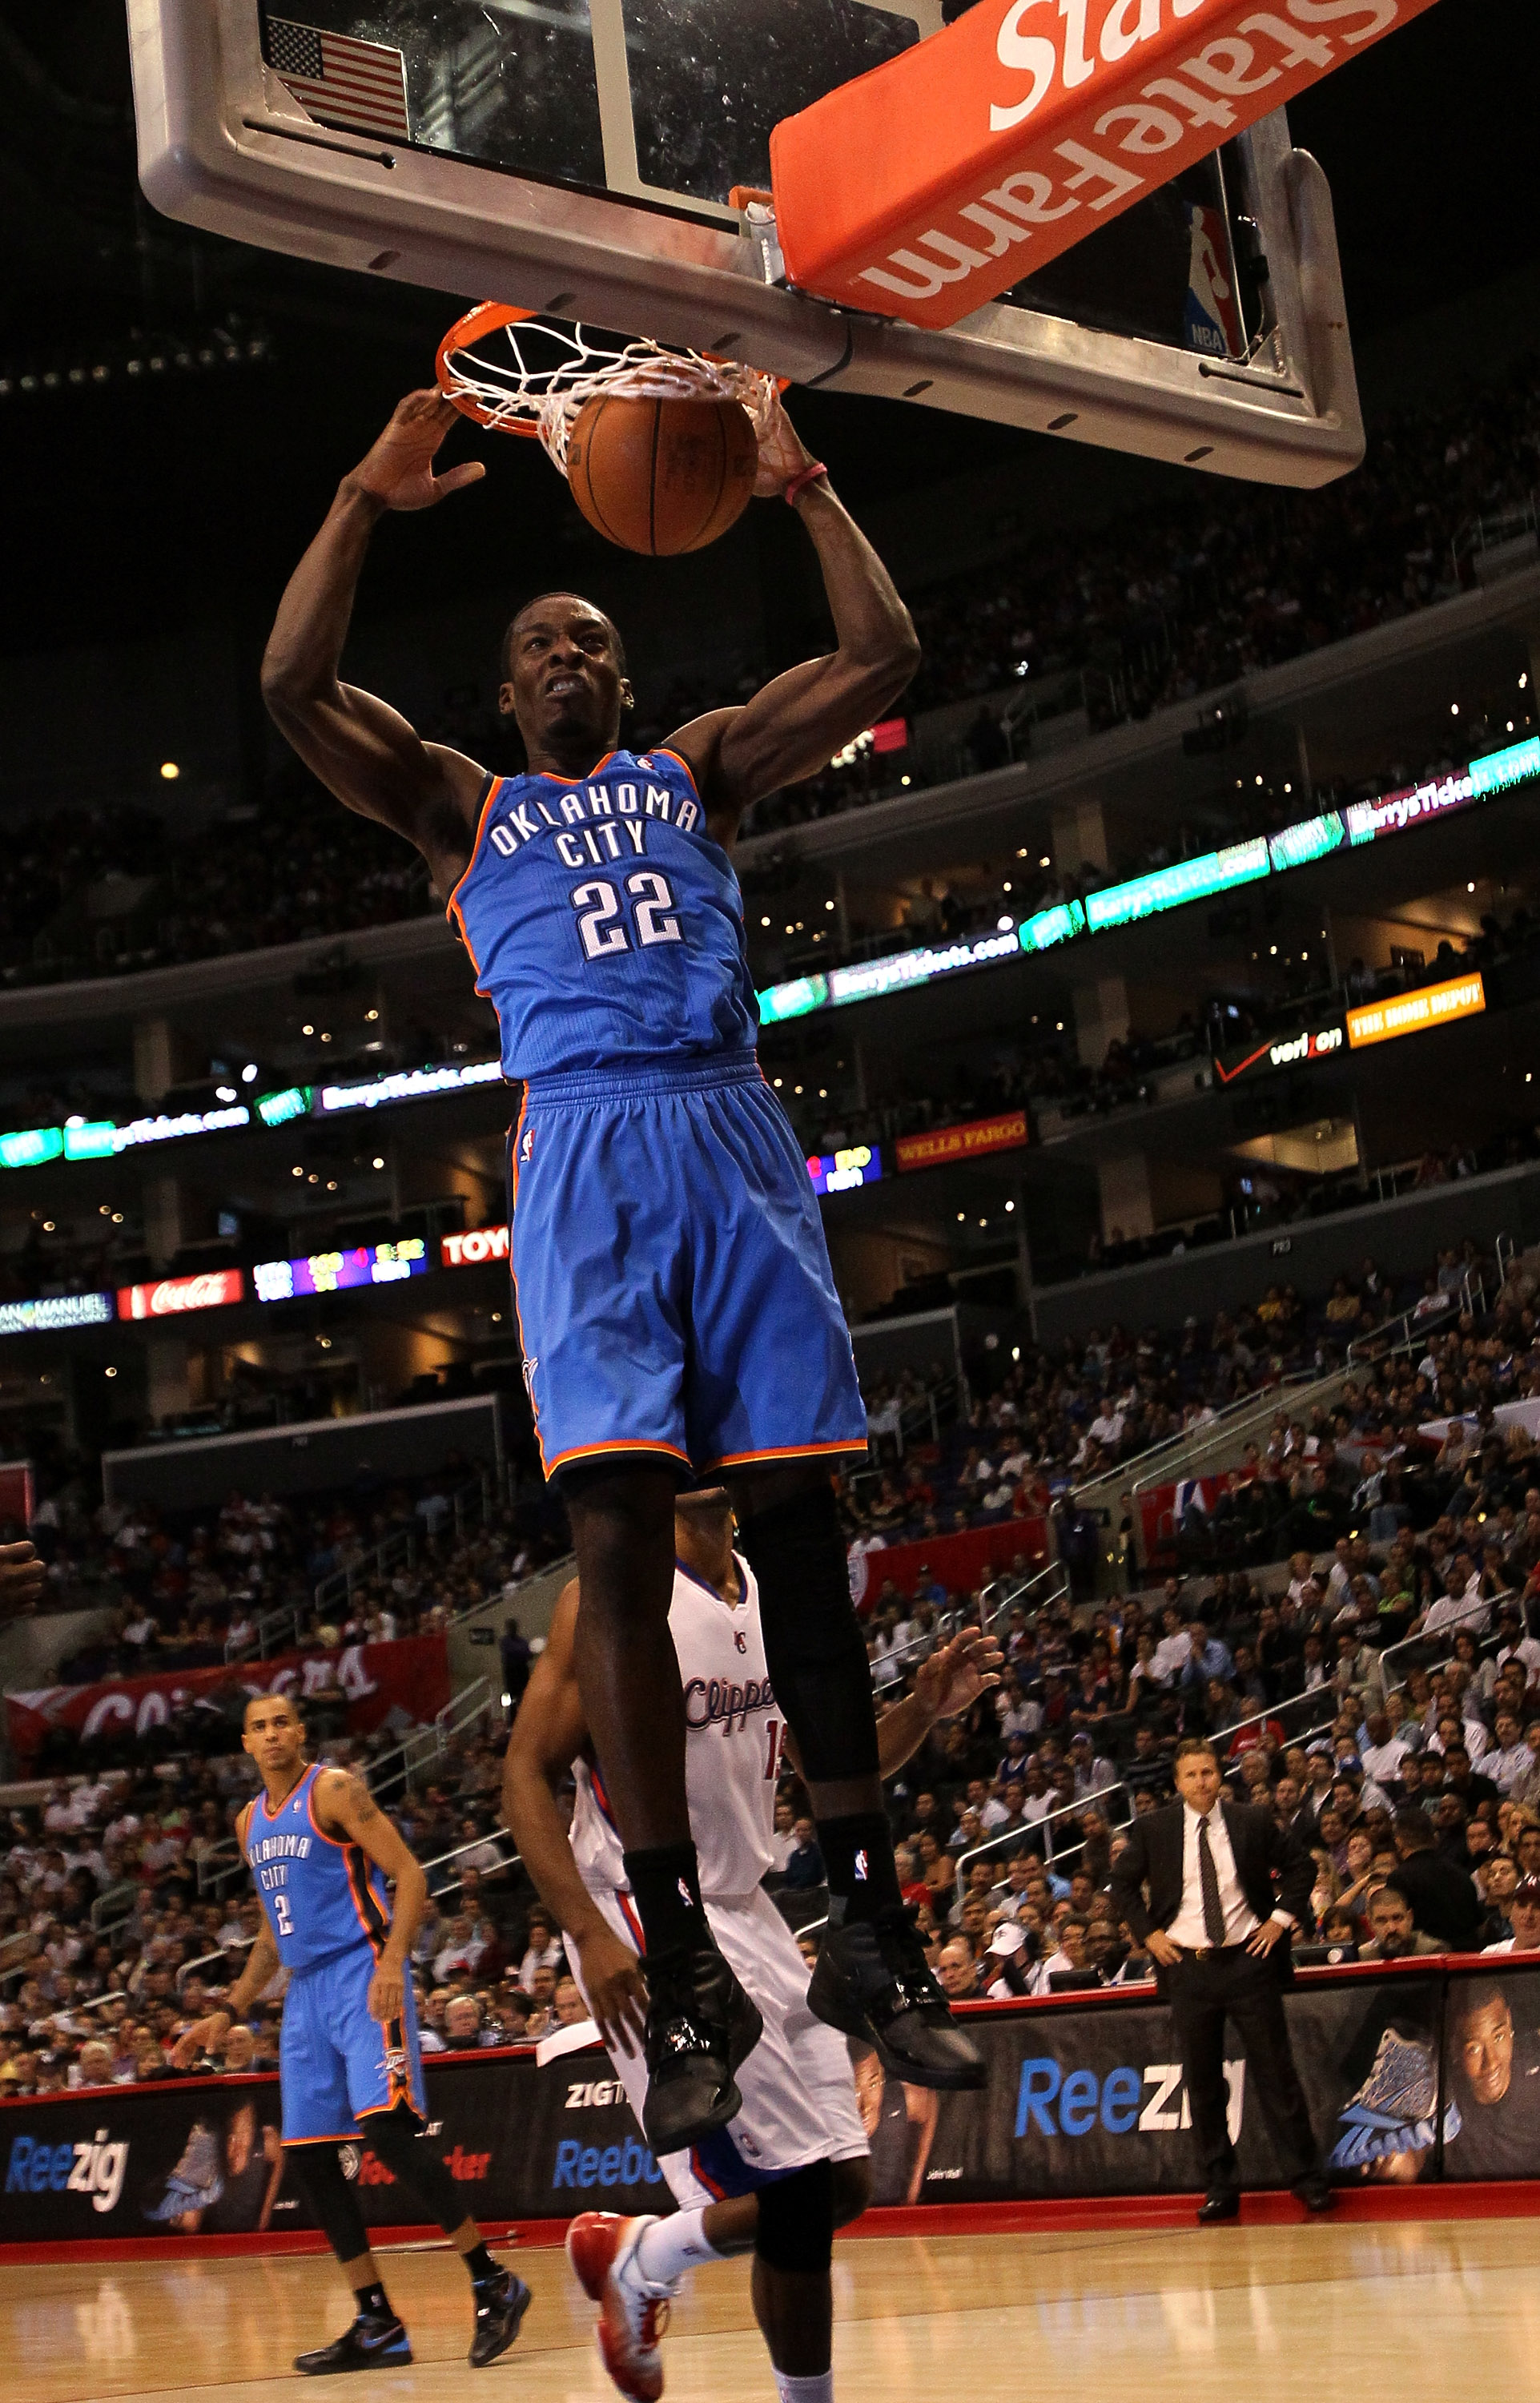 LOS ANGELES - NOVEMBER 3:  Jeff Green #22 of the Oklahoma City Thunder dunks against the Los Angeles Clippers at Staples Center on November 3, 2010 in Los Angeles, California.  NOTE TO USER: User expressly acknowledges and agrees that, by downloading and